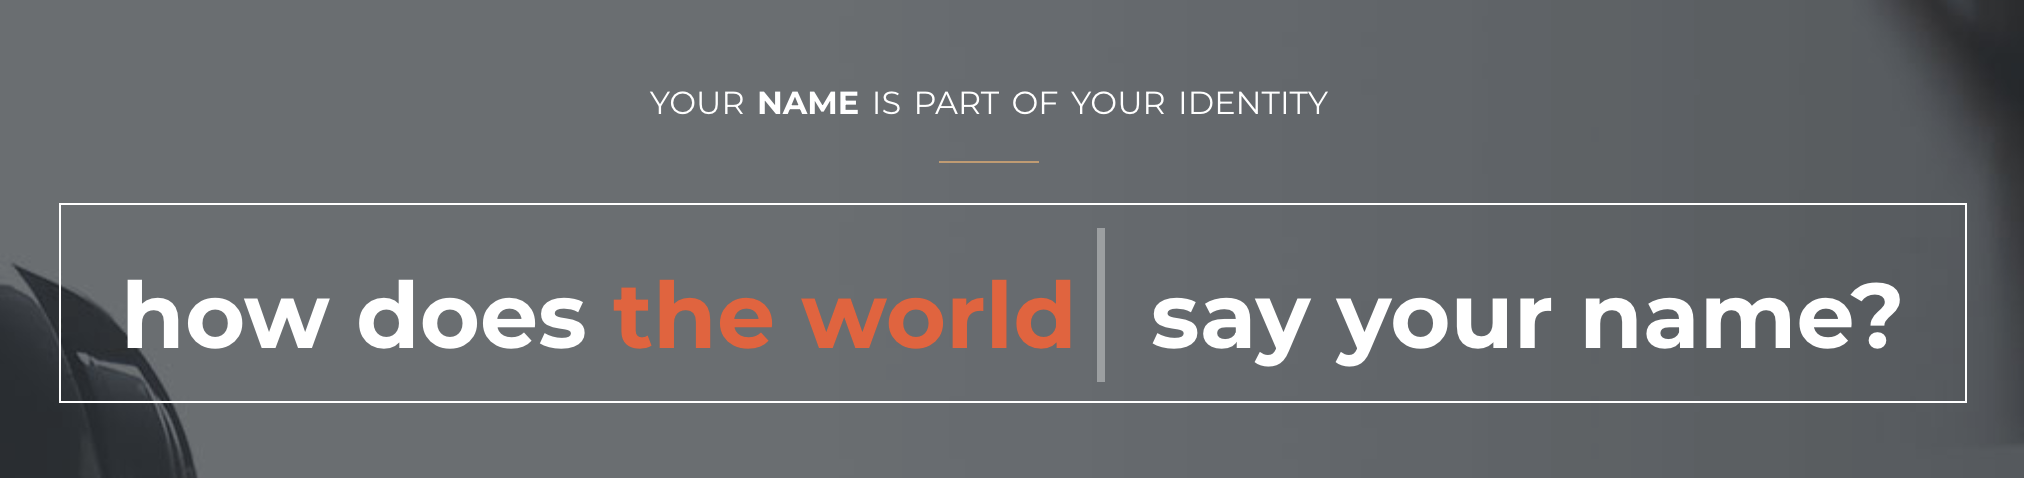 Your name is part of your identity. How does the world say your name?